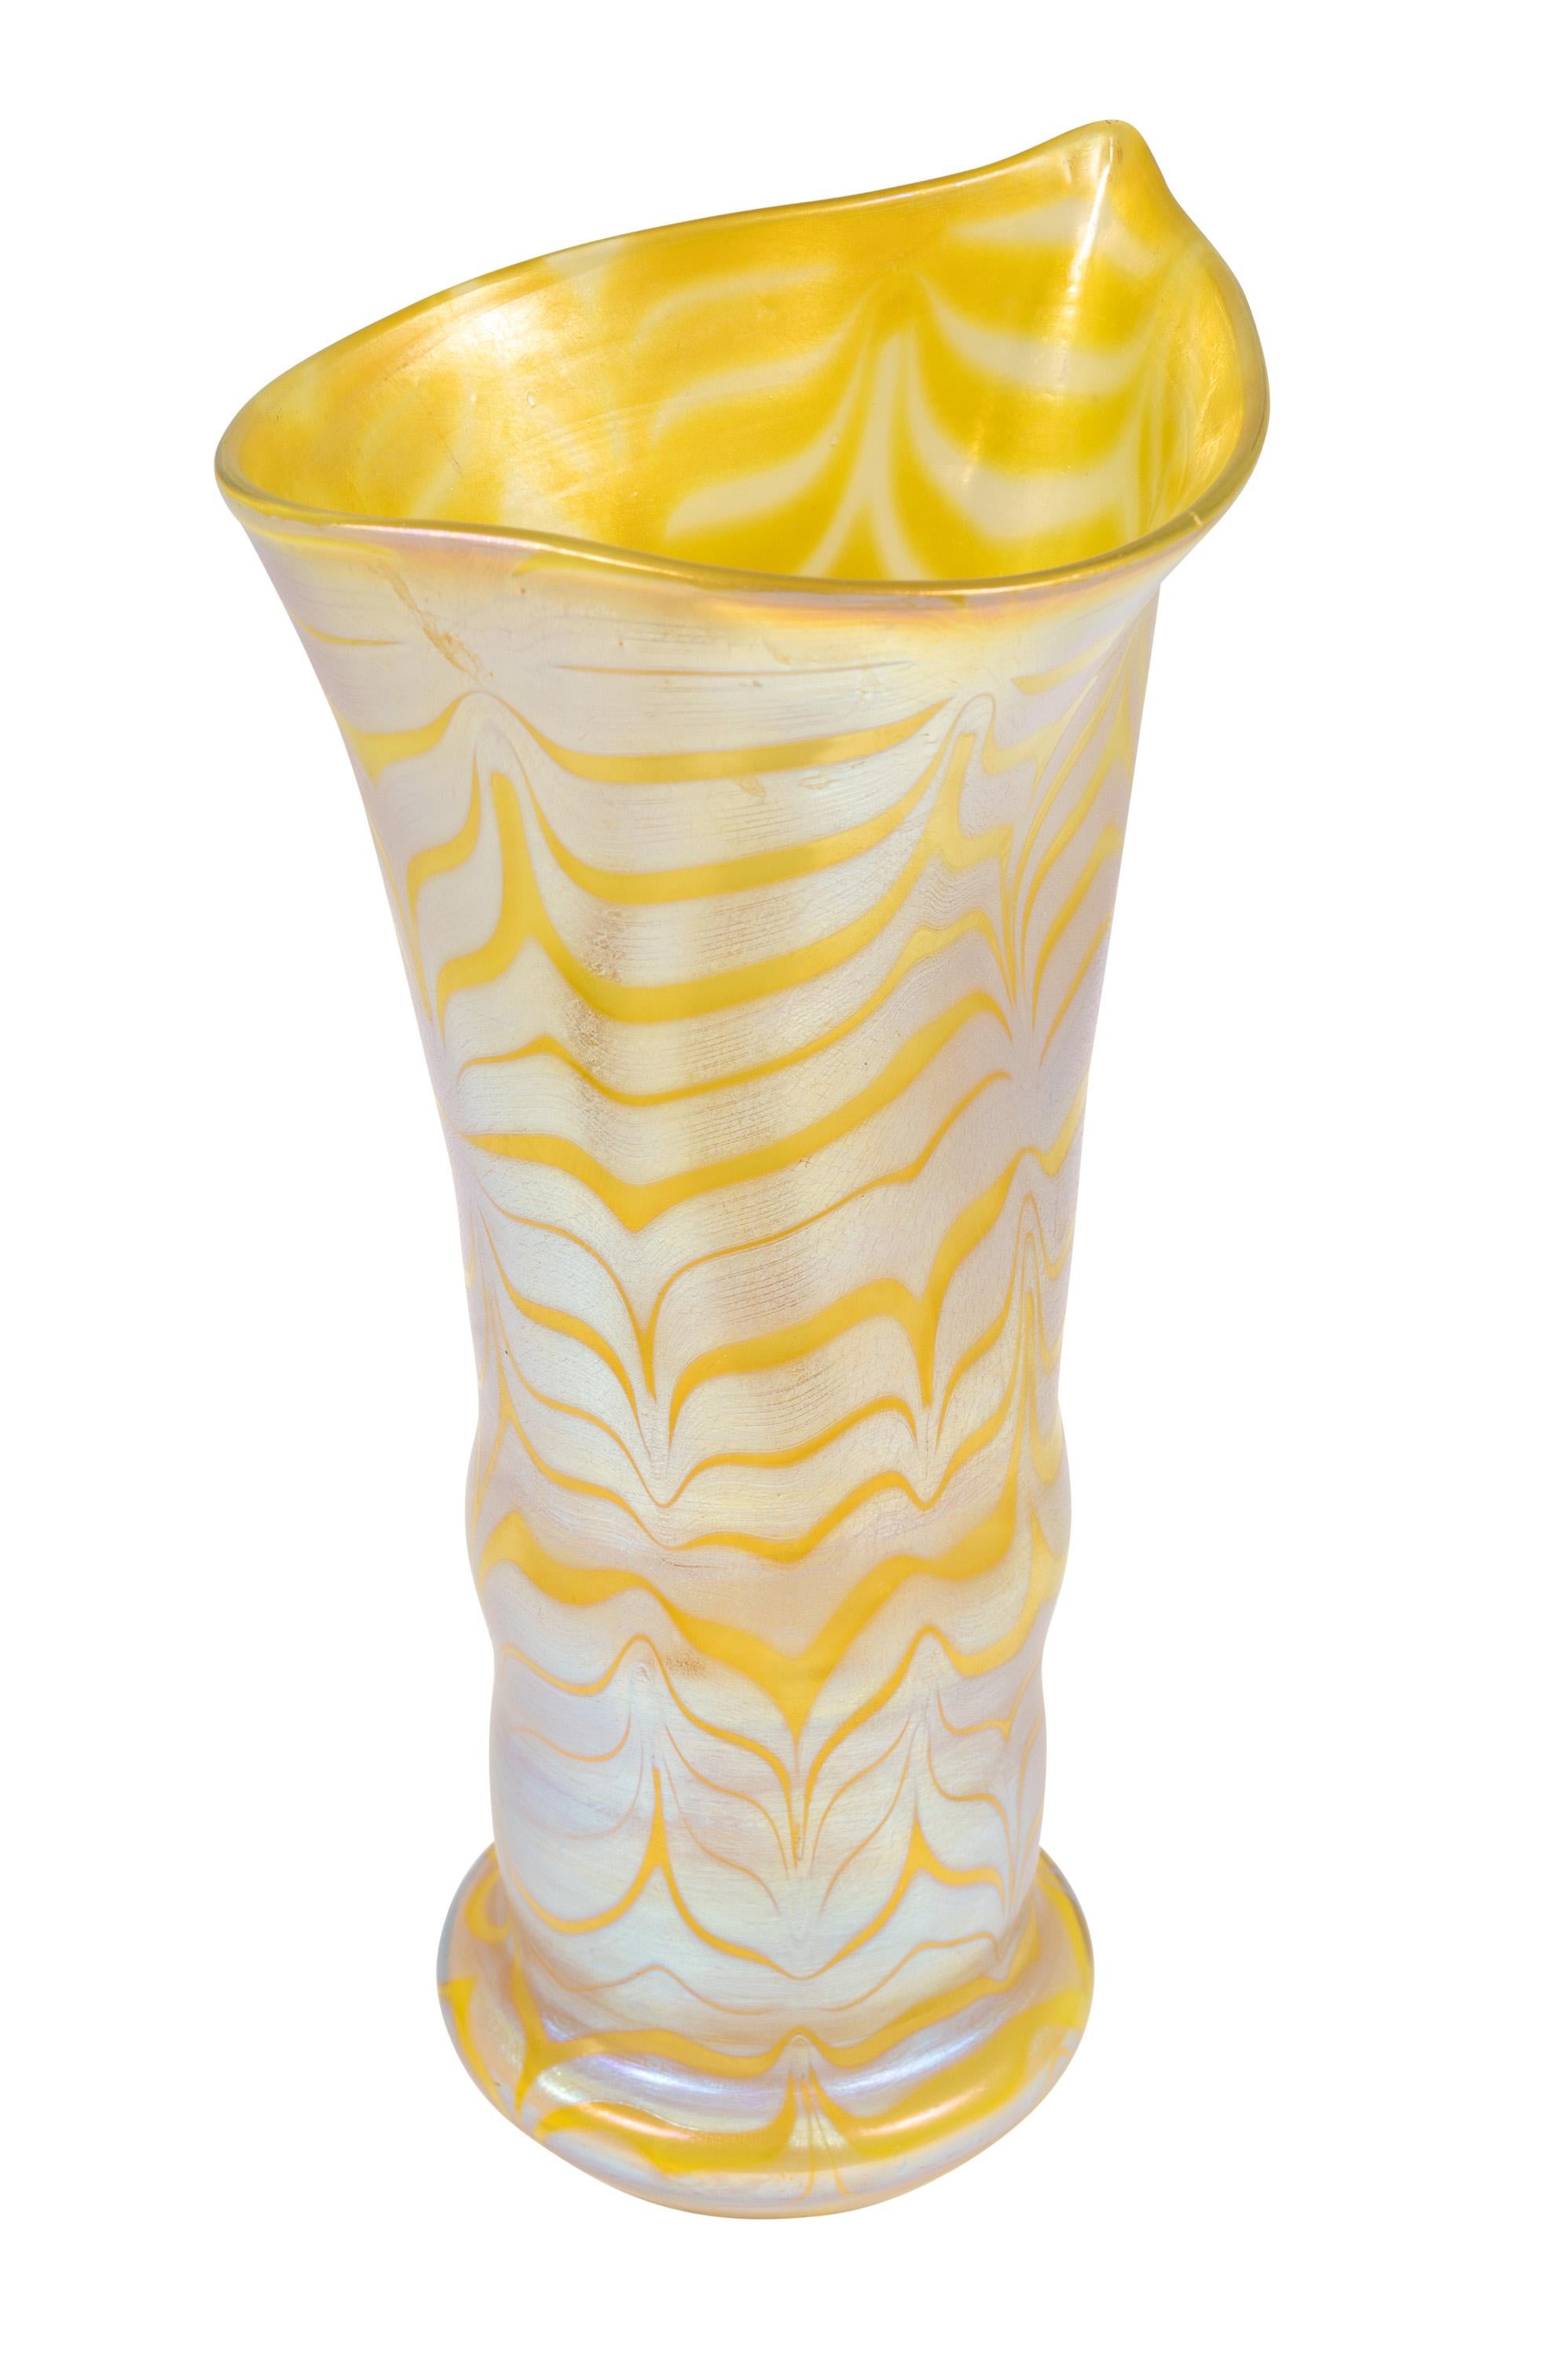 Bohemian glass vase, manufactured by Johann Loetz Witwe, Phenomen Genre 85/3780 decoration, signed, ca. 1900, Yellow, Silver, Viennese Art Nouveau, Jugendstil, Art Deco, art glass, iridescent glass.

Technique and material: Glass, mould-blown and